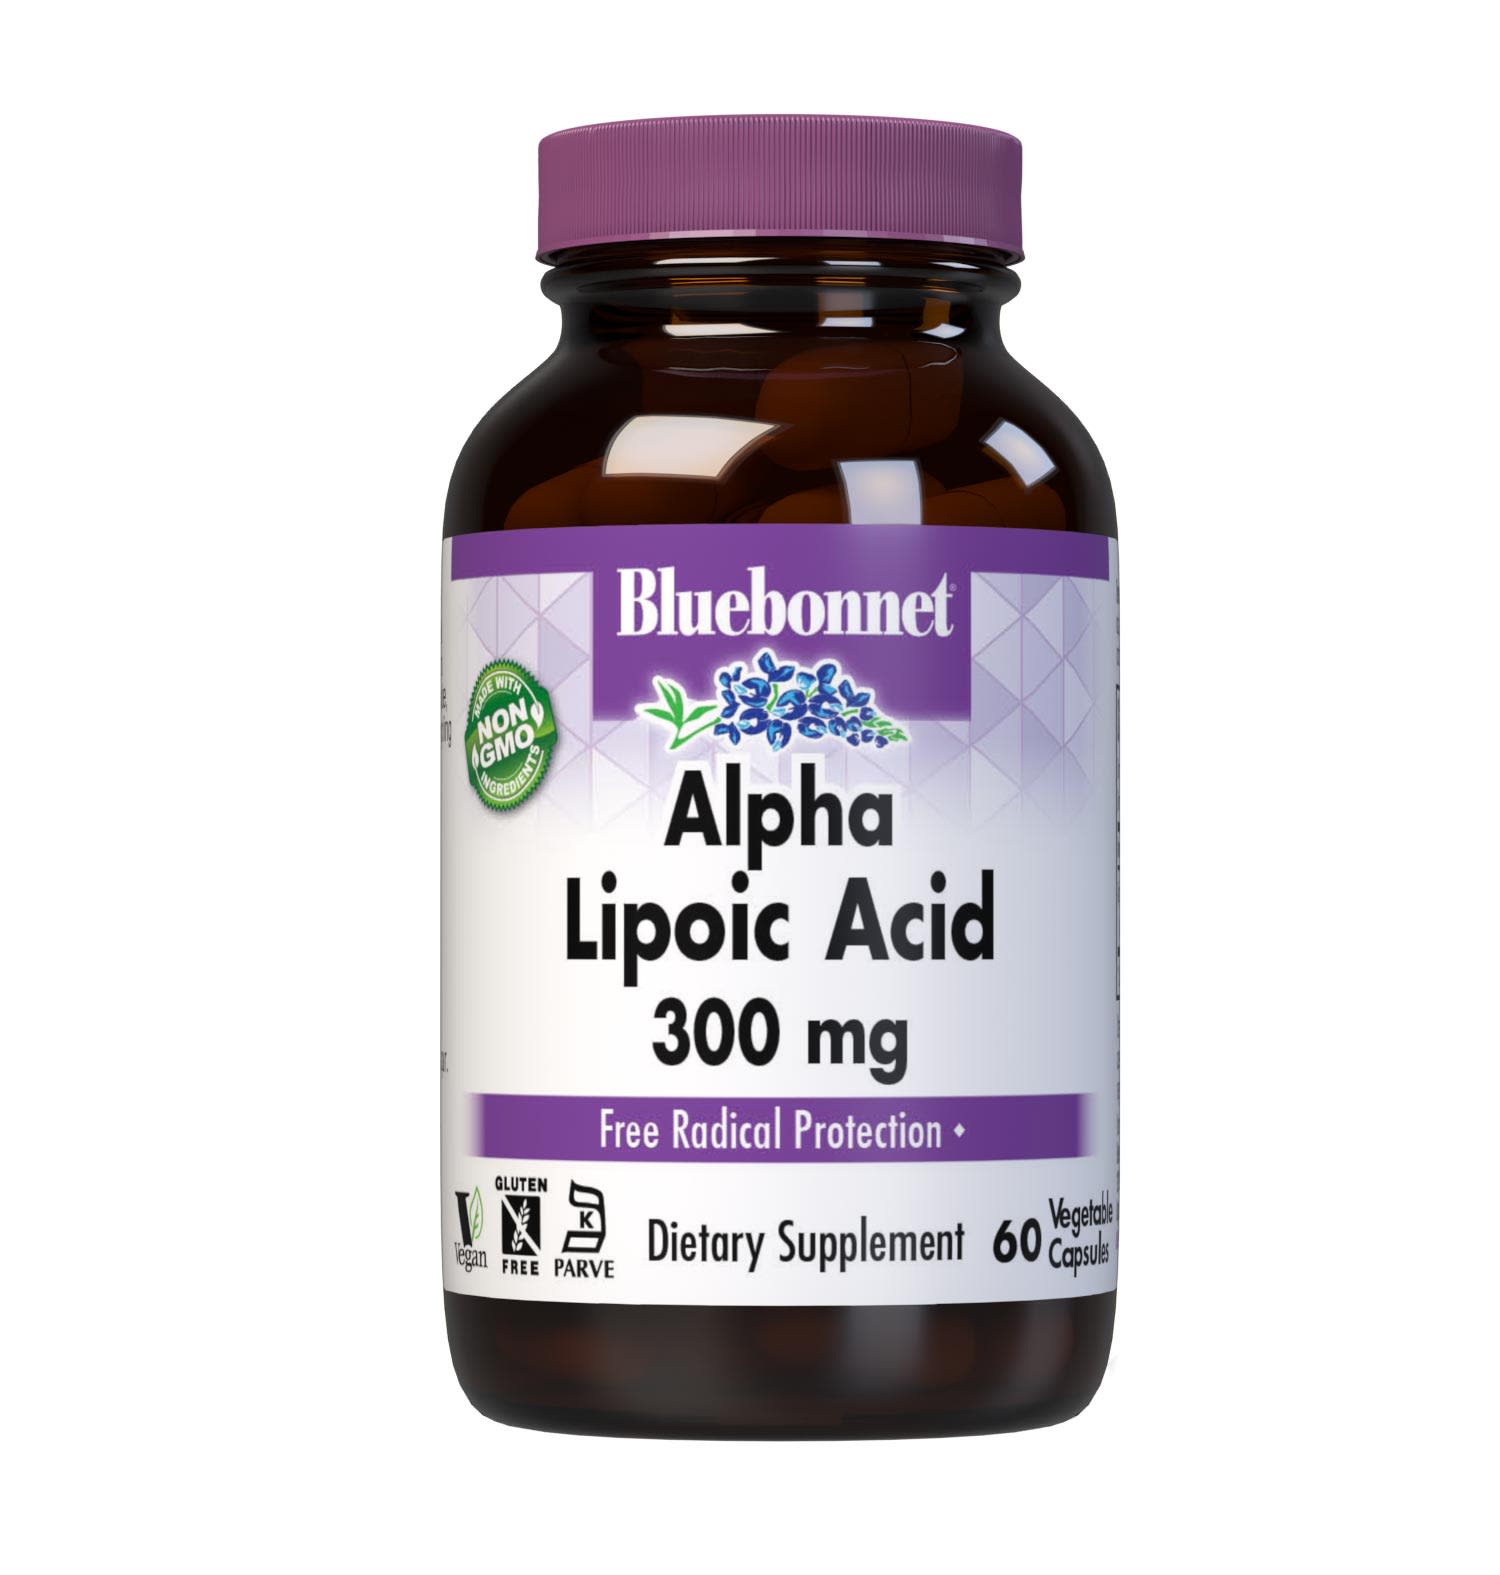 Bluebonnet's Alpha Lipoic Acid 300 mg 60 Vegetable Capsules are formulated with the powerful free radical scavenger alpha lipoic acid in its crystalline form. Alpha lipoic acid is unique in that it is both fat-soluble and water-soluble, and supports the production of glutathione and the recycling of the vitamins C and E for cellular protection. #size_60 count